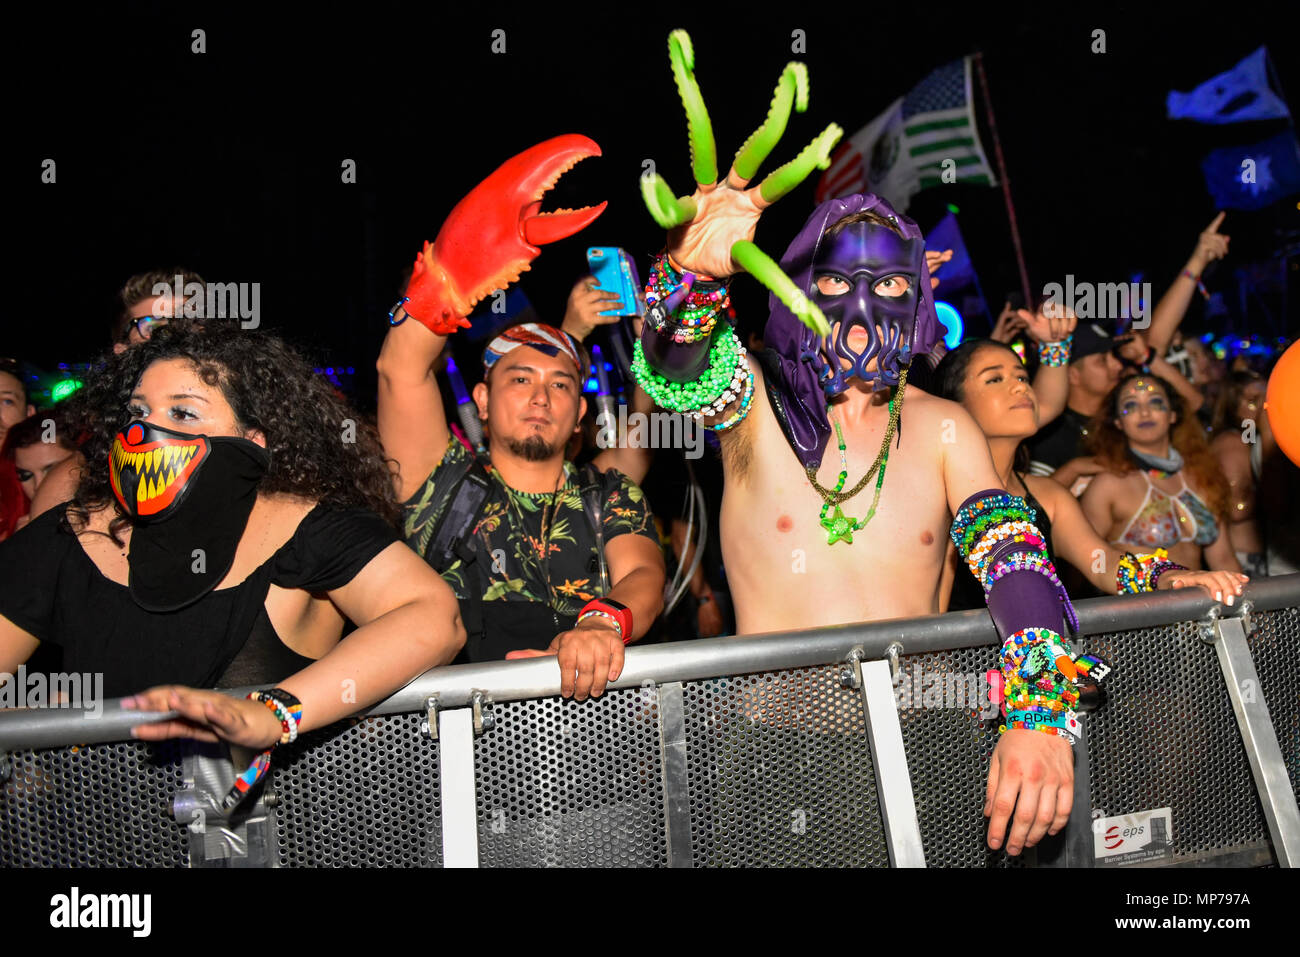 Las Vegas, Nevada, May 20, 2018, The 2018 Electric Daisy Carnival, edc  festival, Day 3, Credit: Ken Howard Images/Alamy Live News Stock Photo -  Alamy